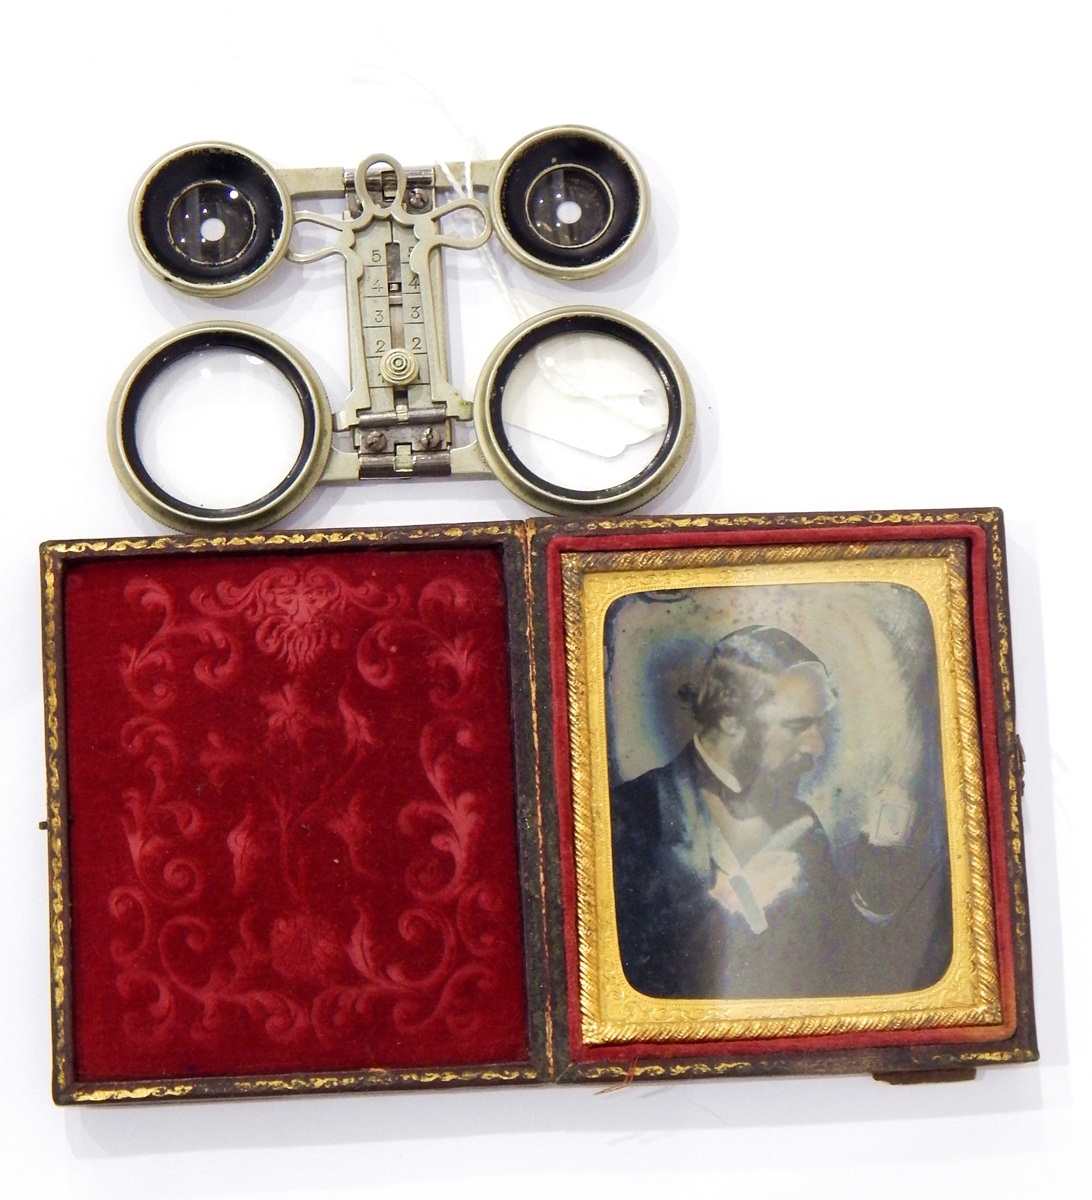 Two Victorian daguerreotypes, cased and a metal folding viewer in leather case by R & J F Limited,